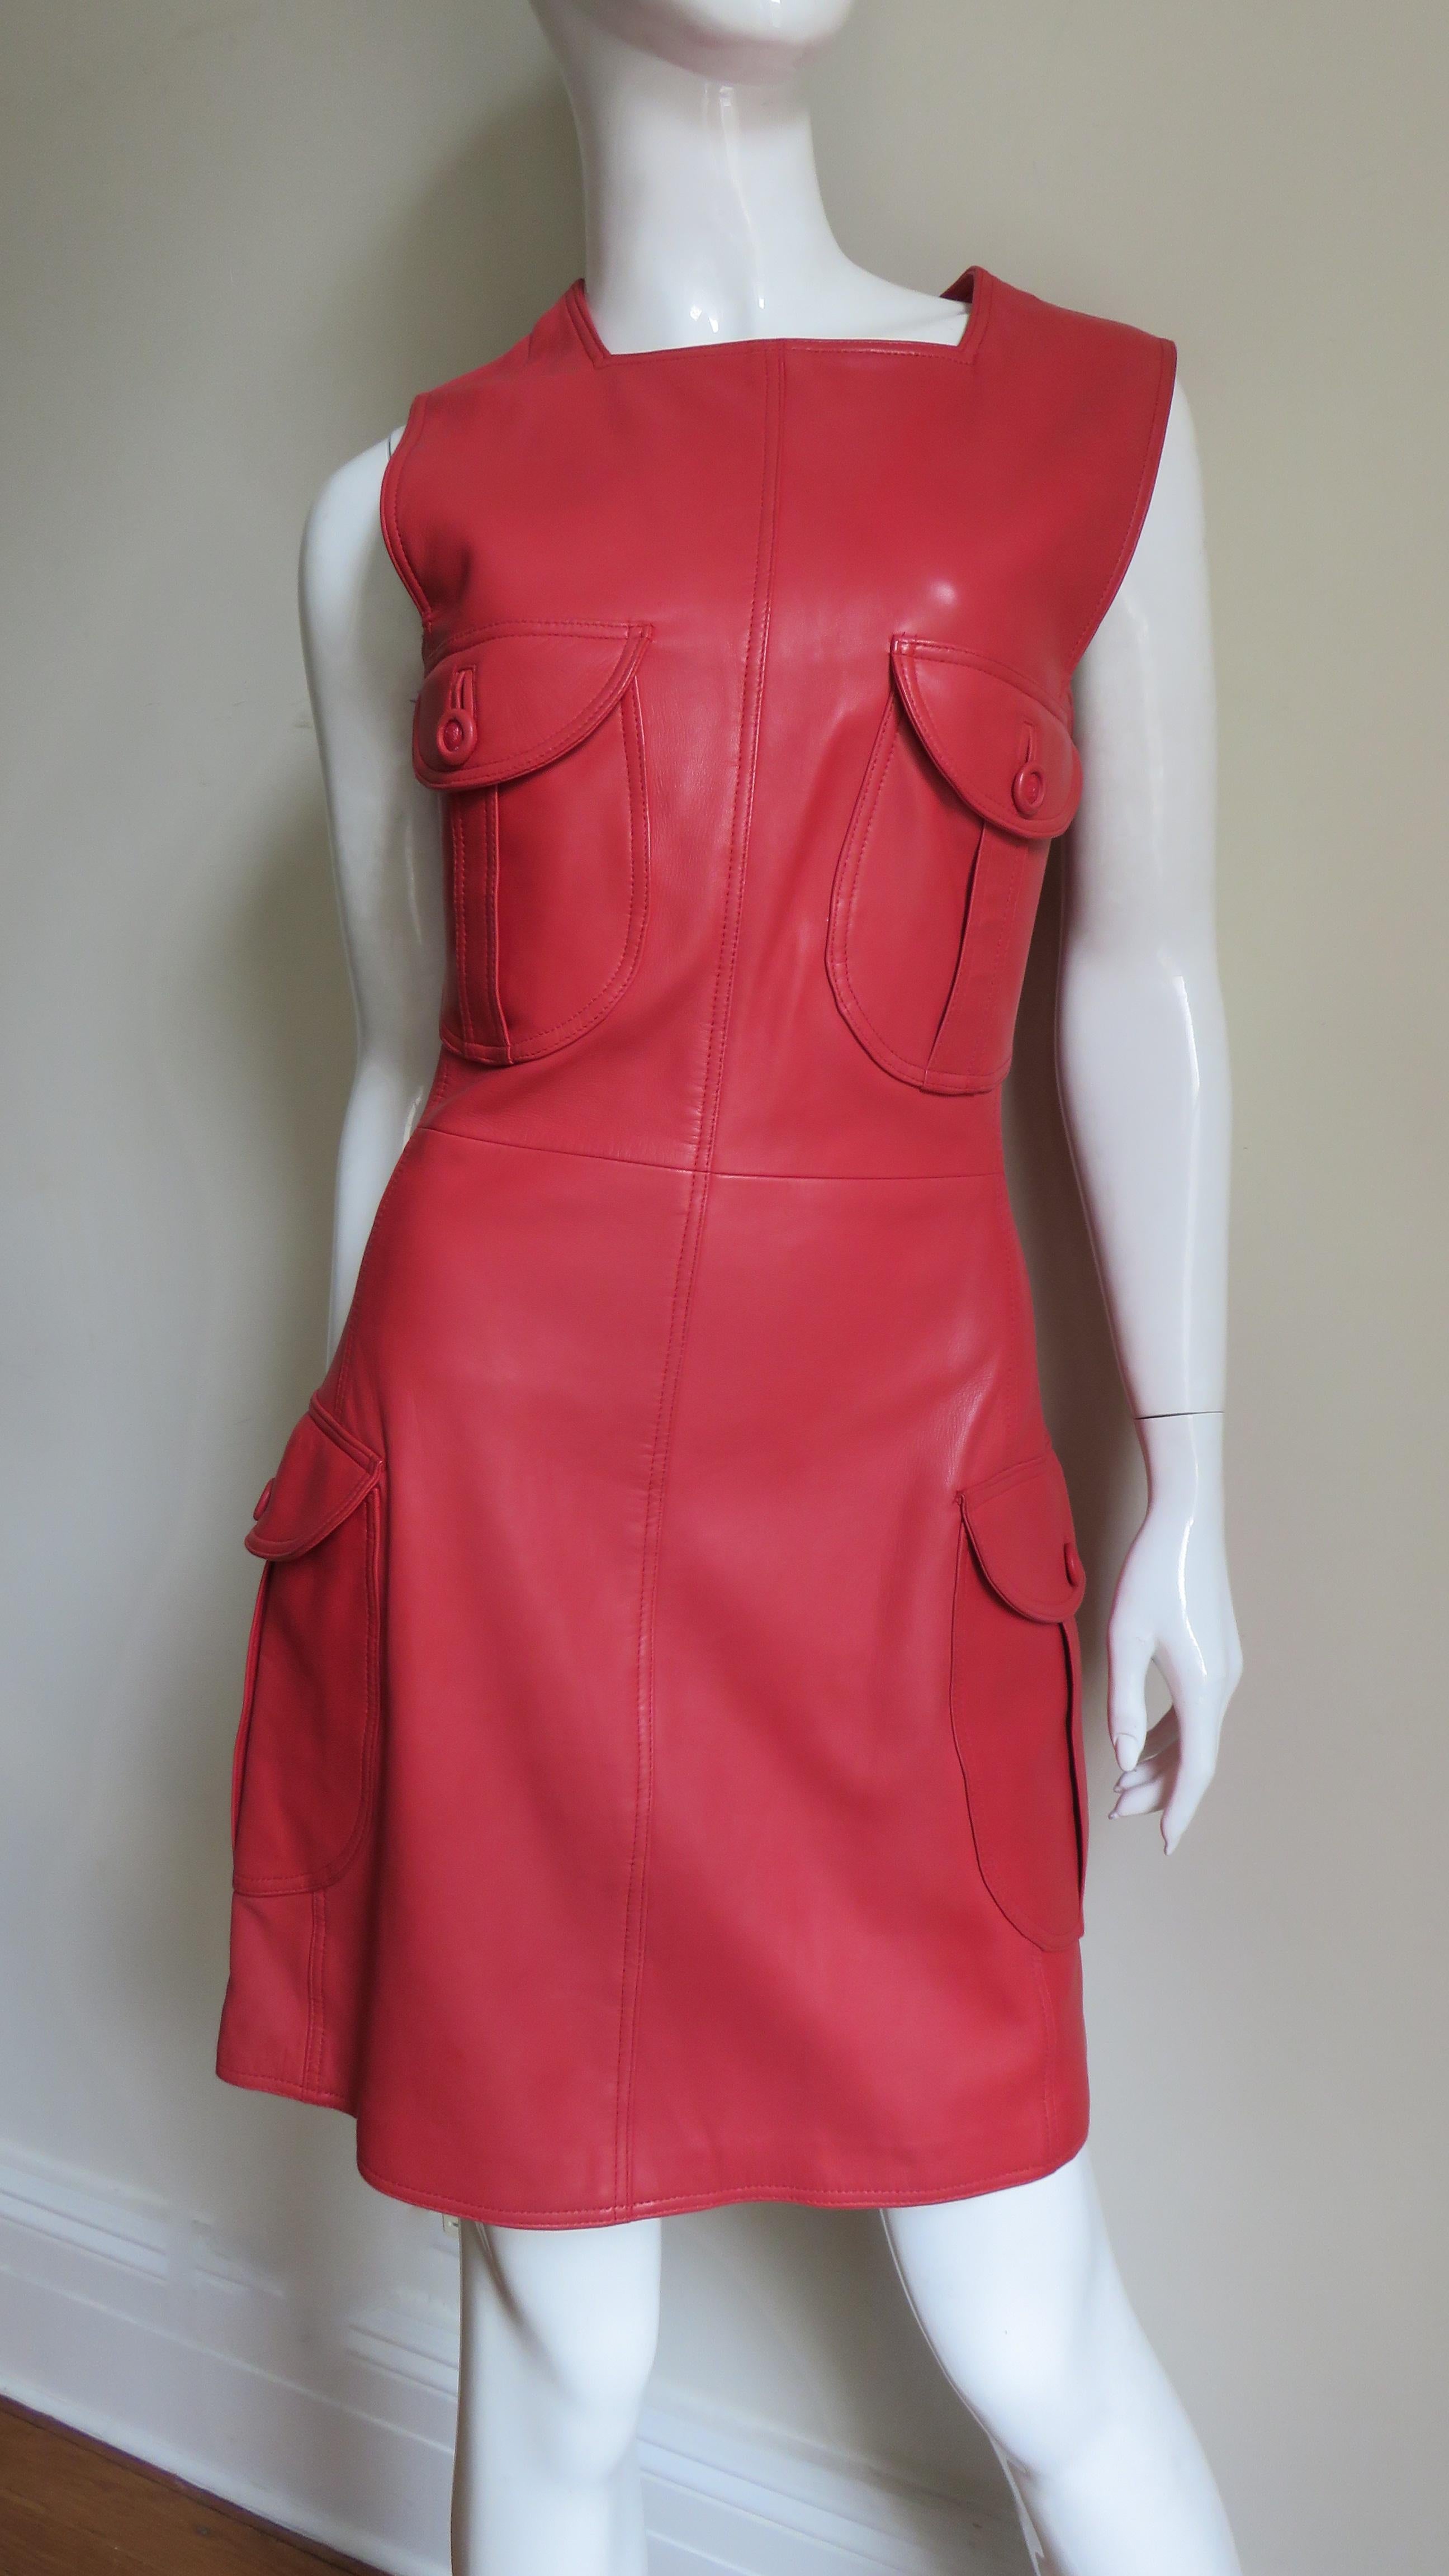 A fabulous red leather dress by Gianni Versace.  It is sleeveless with a squared neckline and armholes and flap patch pockets each with a large matching medusa head embossed button and a bound buttonhole- 2 on the front bodice and 2 on the skirt